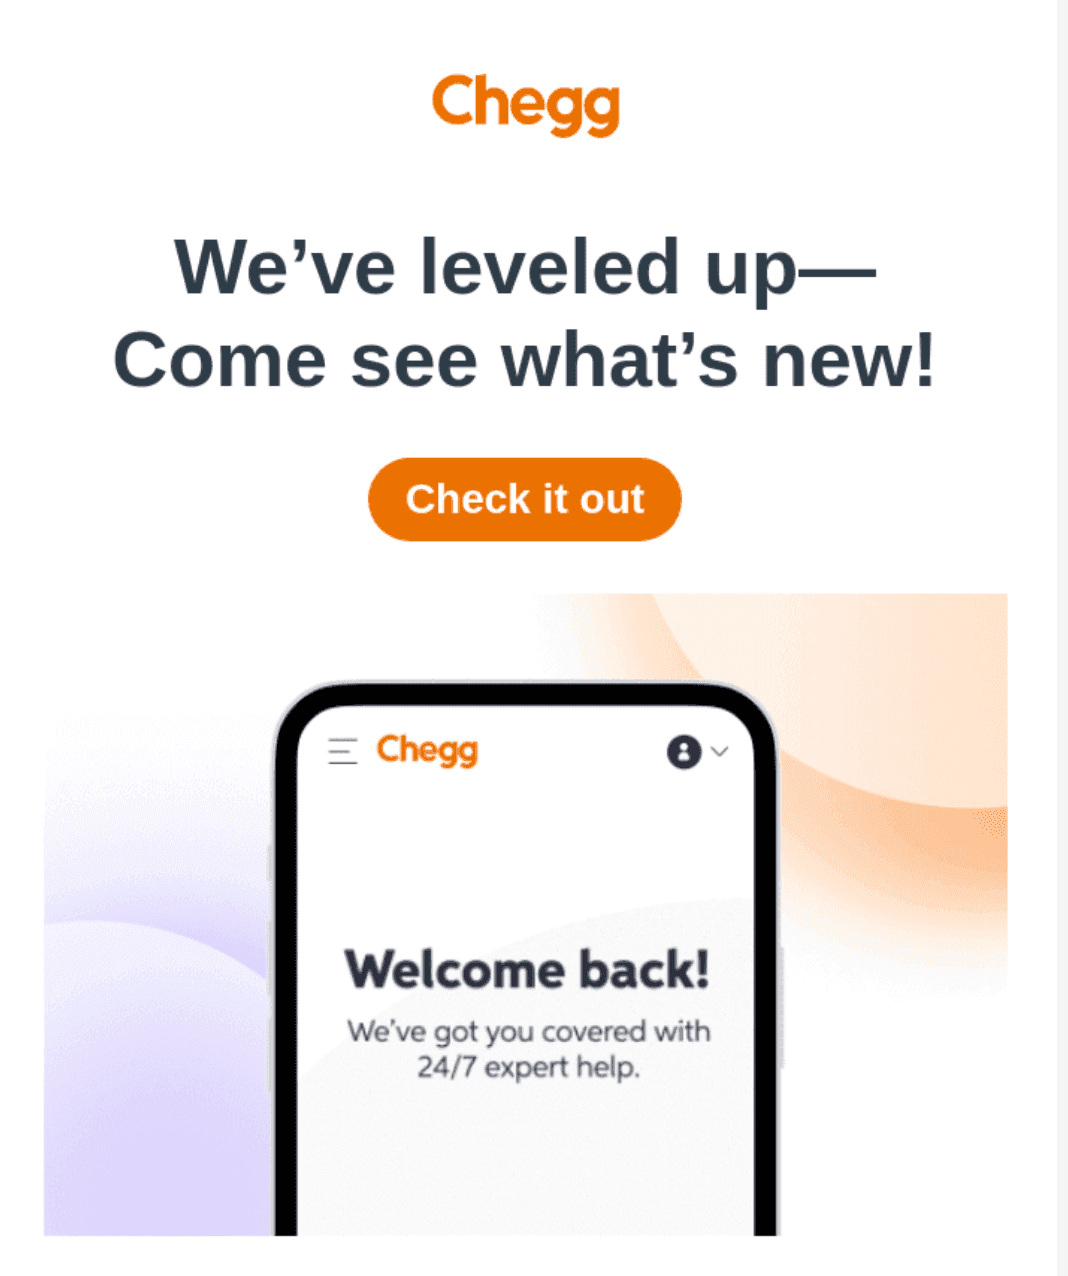 We've leveled up- Come see what's new! Chegg newsletter